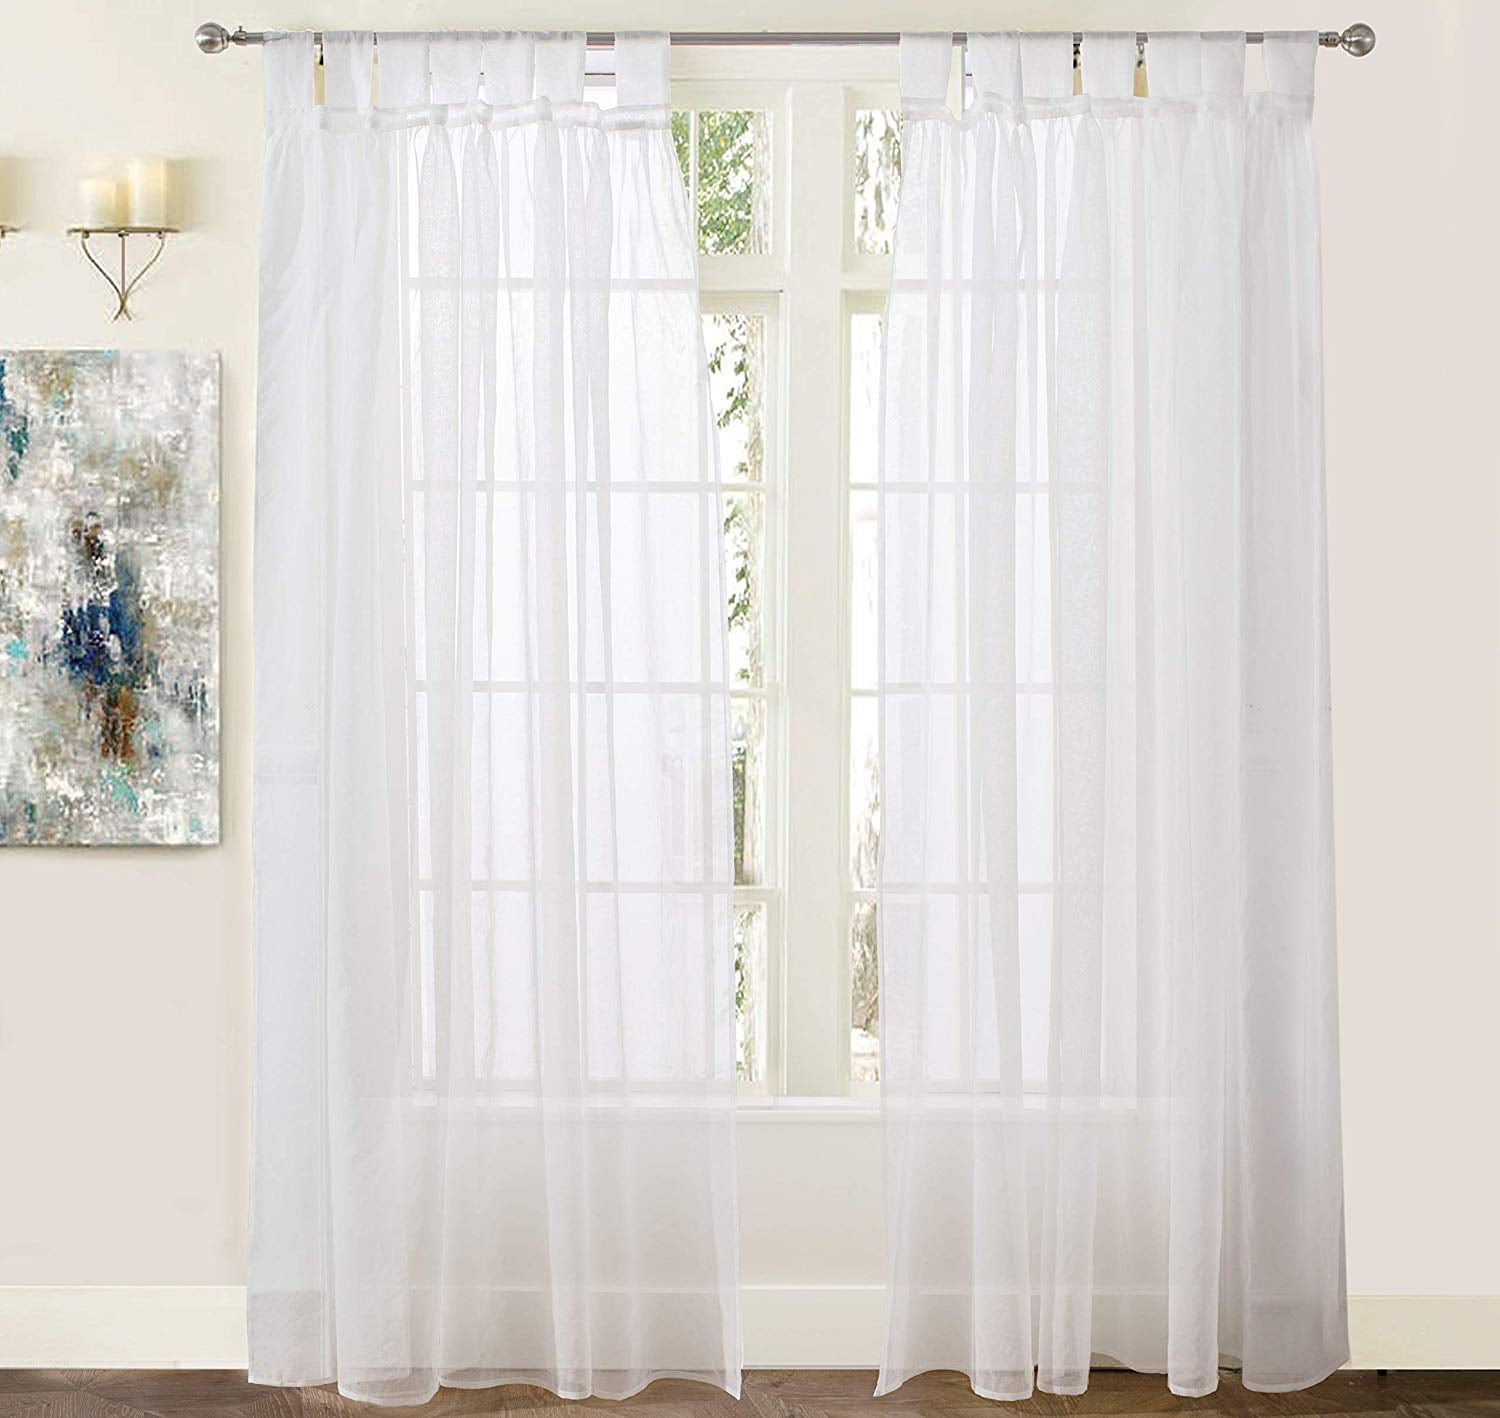 Cotton Voile White Shabby Chic Country Ruffled Curtains Panels Set Romantic New 